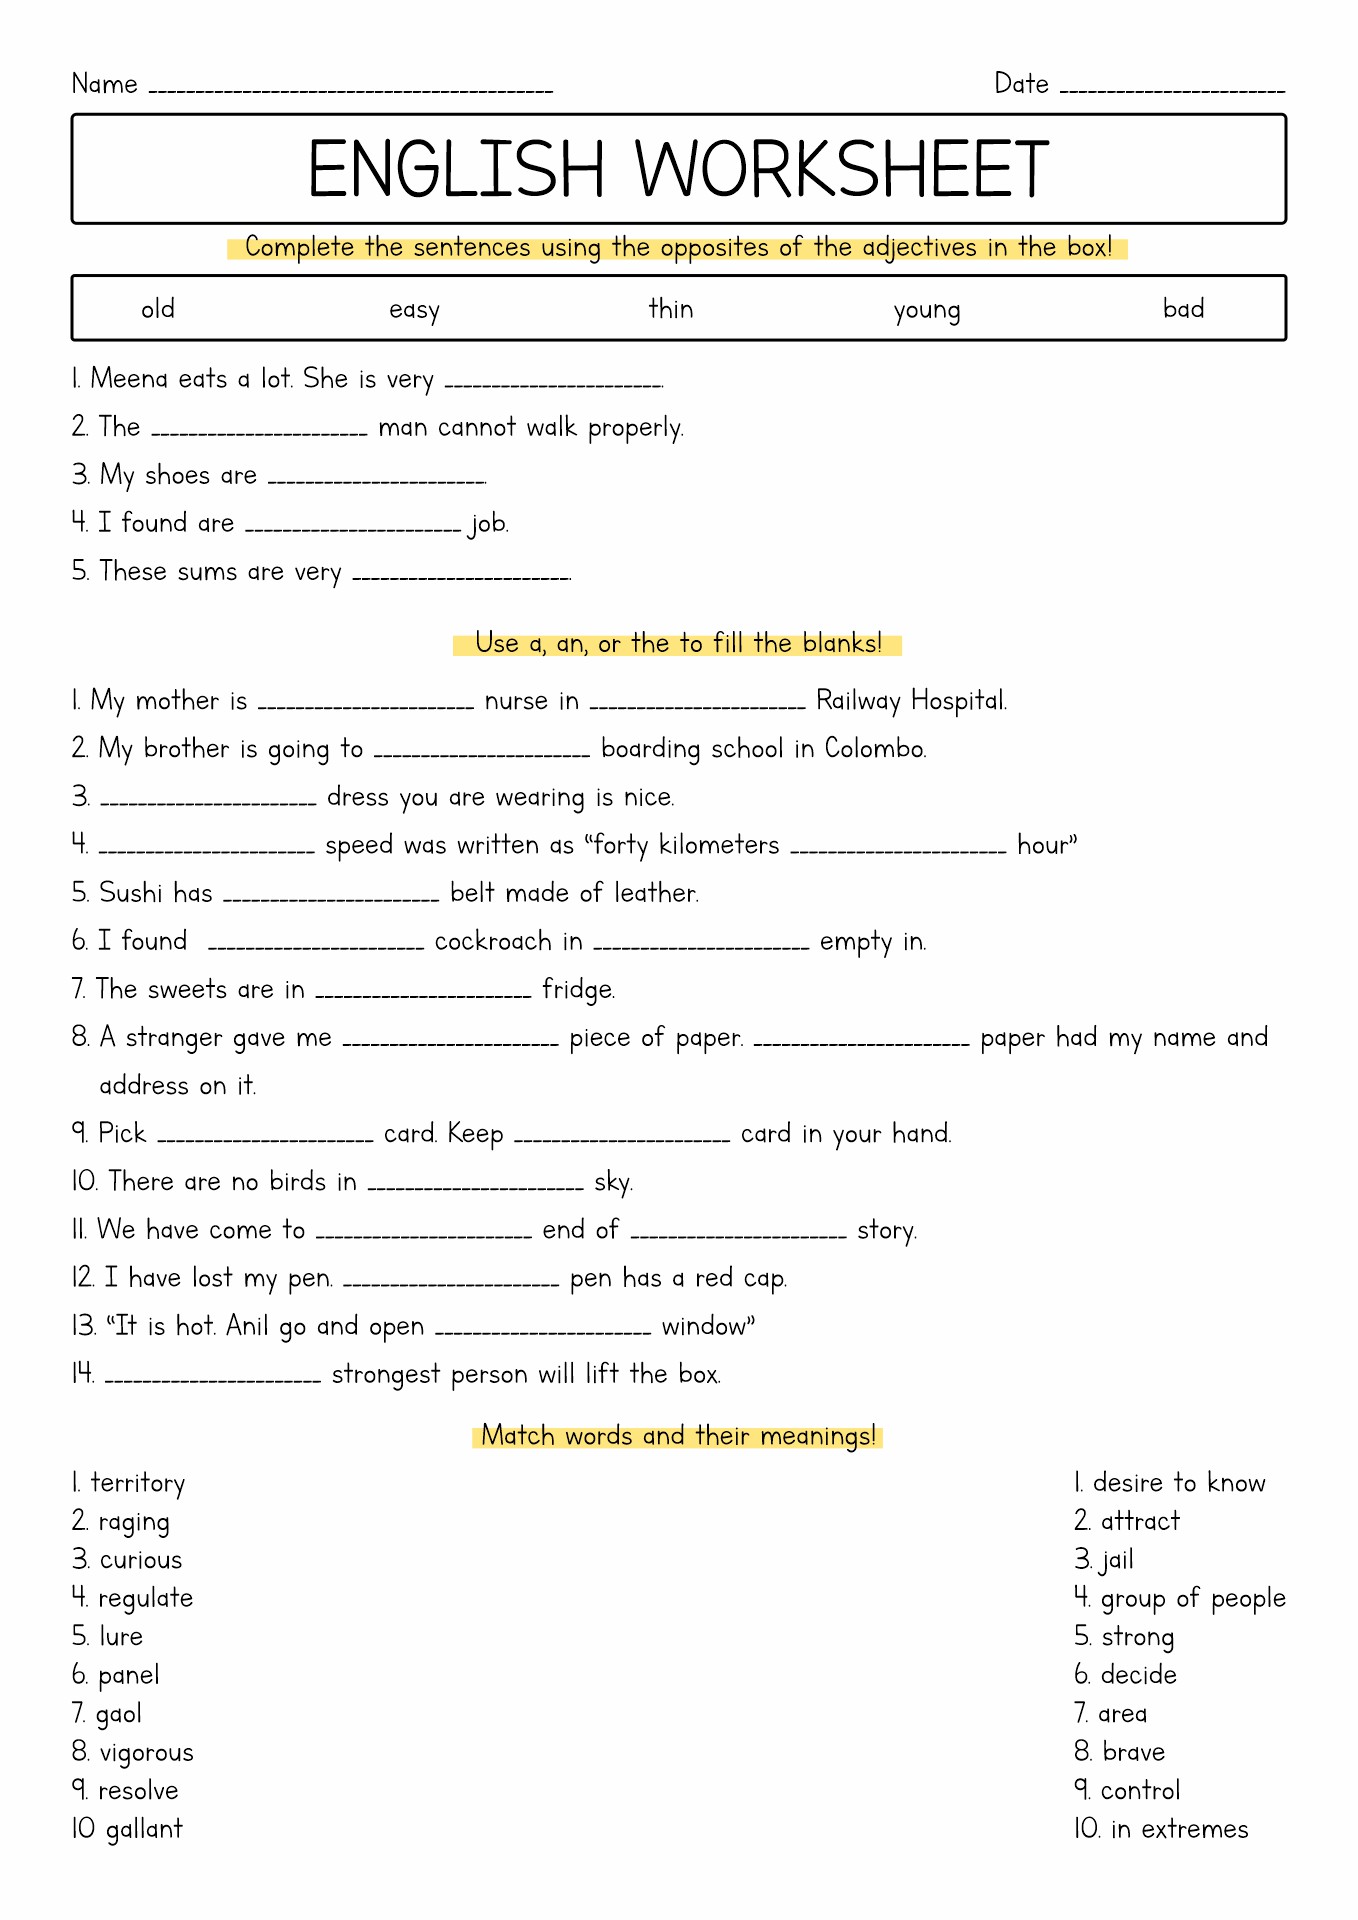 17 Best Images Of 9th Grade Vocabulary Worksheets 9th Grade Spelling Words Worksheets